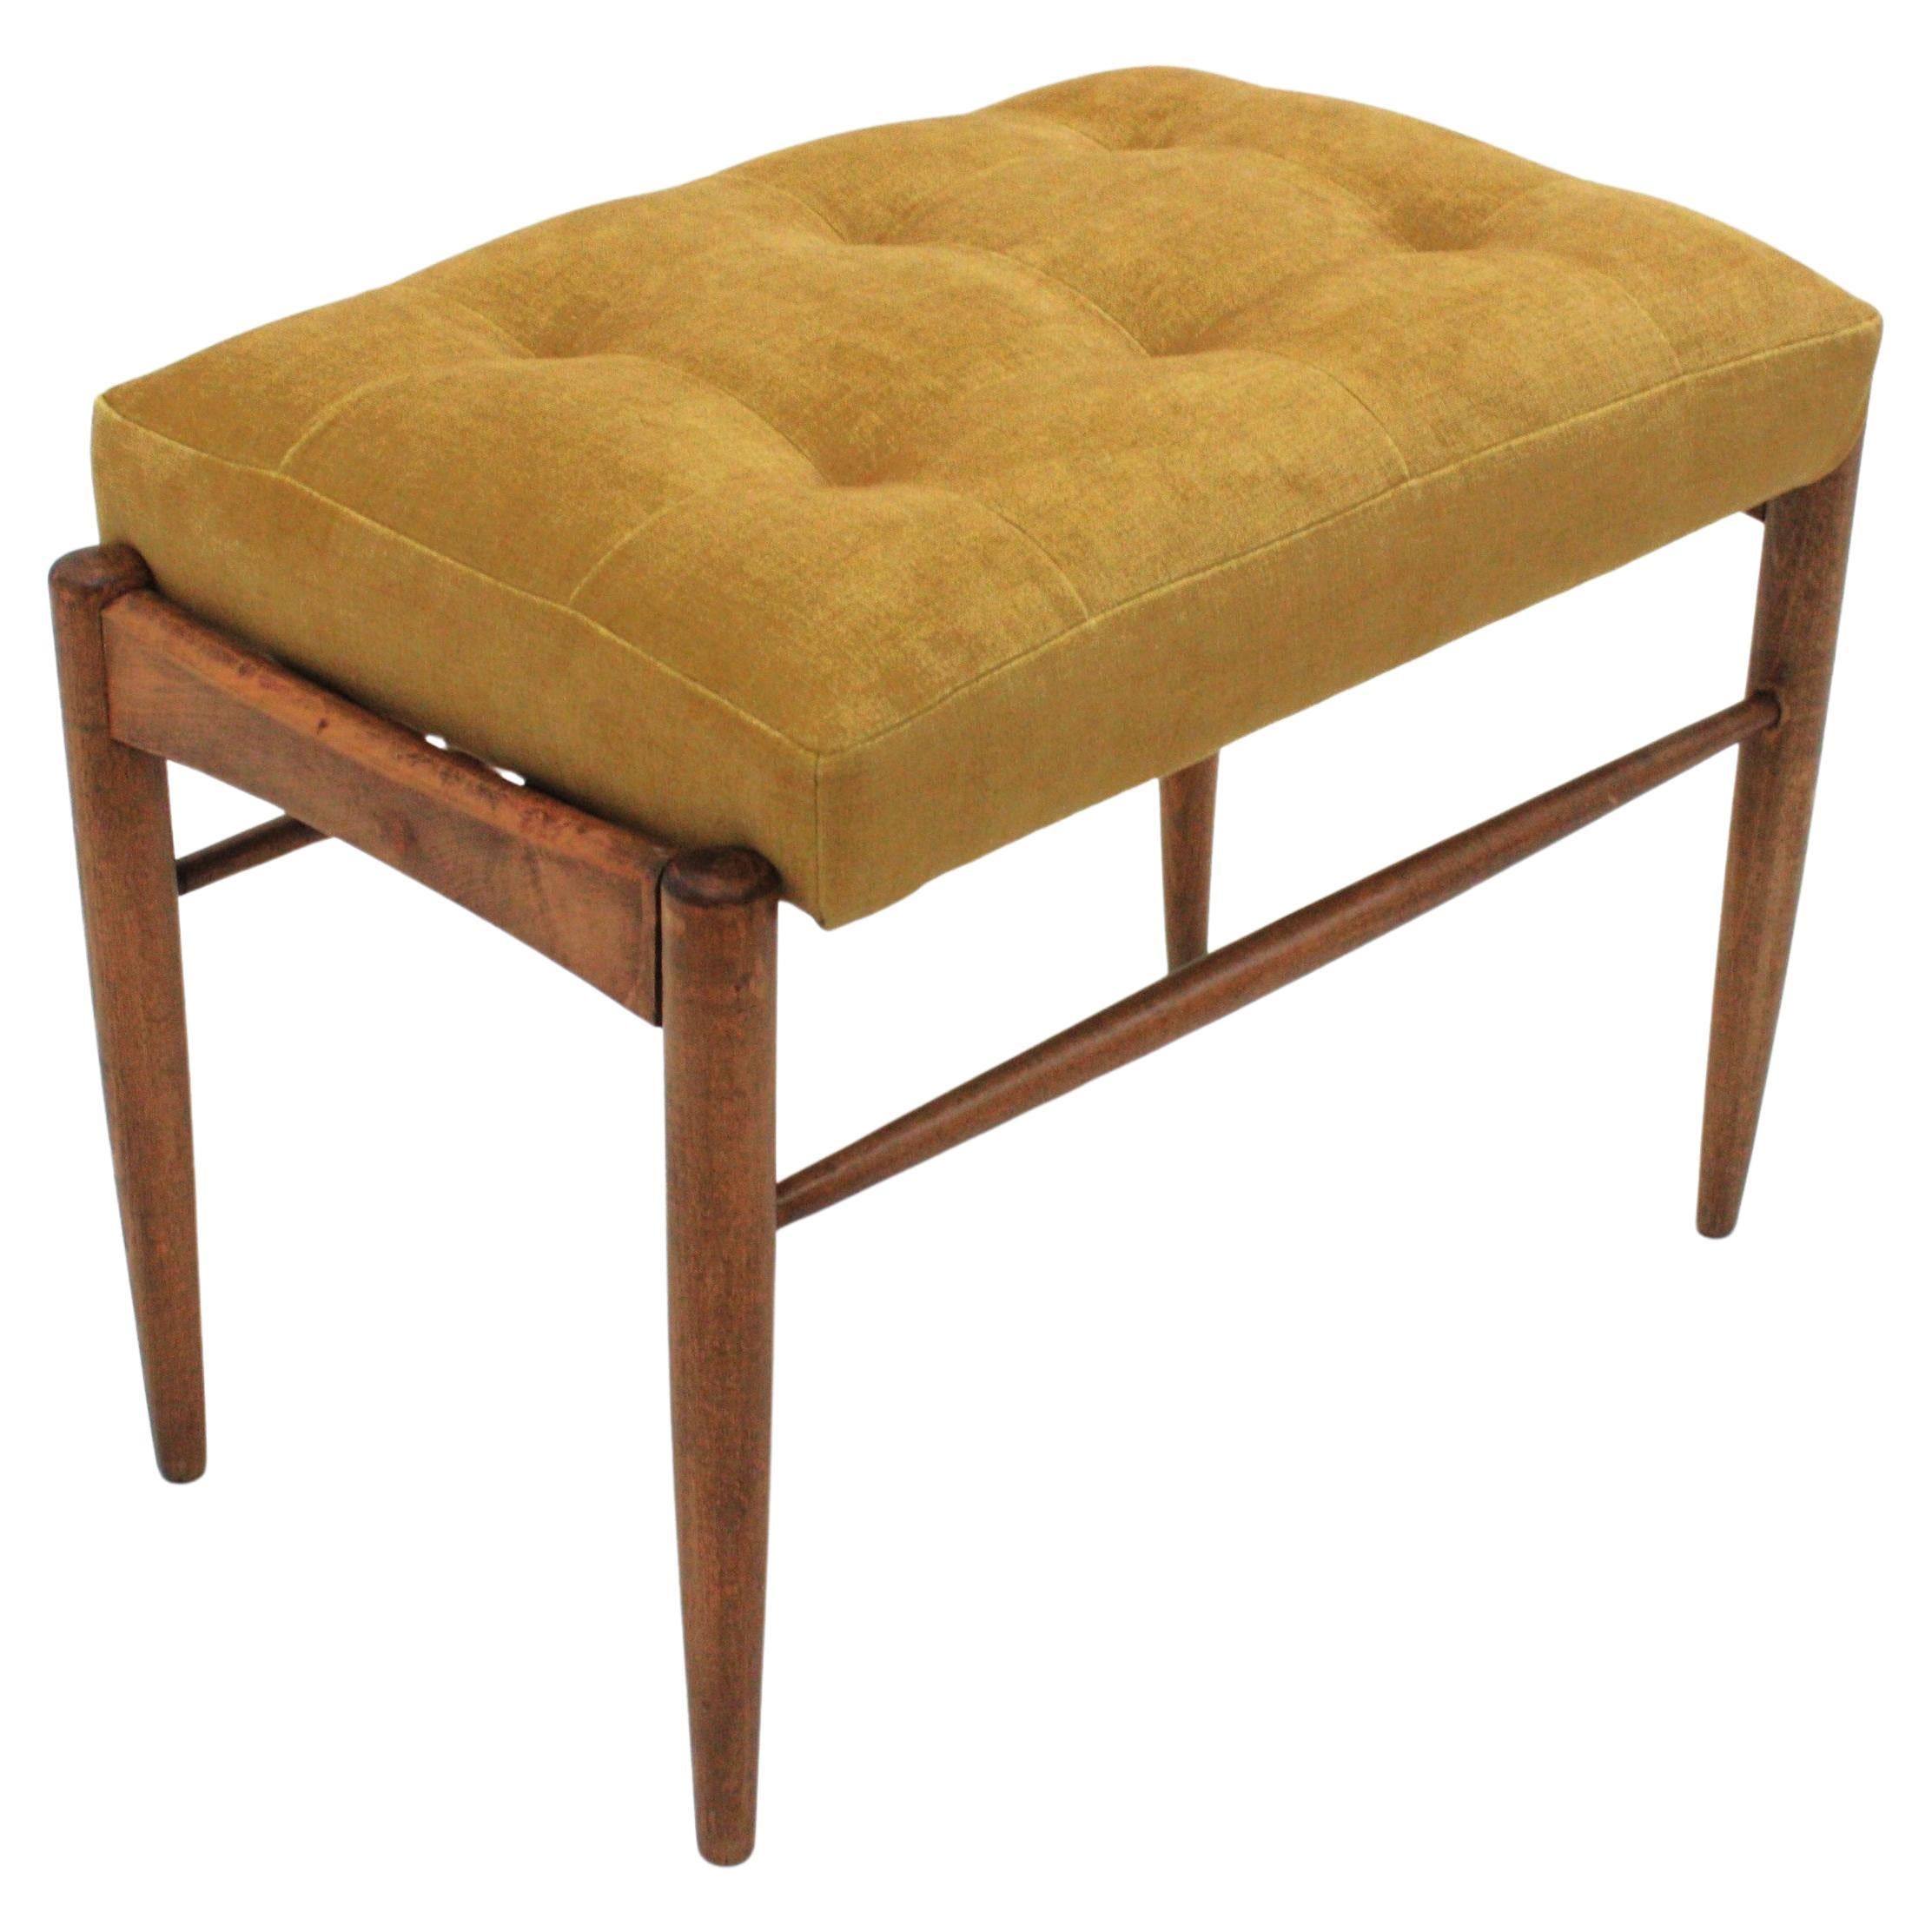 Scandinavian Modern Stool Ottoman or Bench New Upholstered in Yellow Chenille